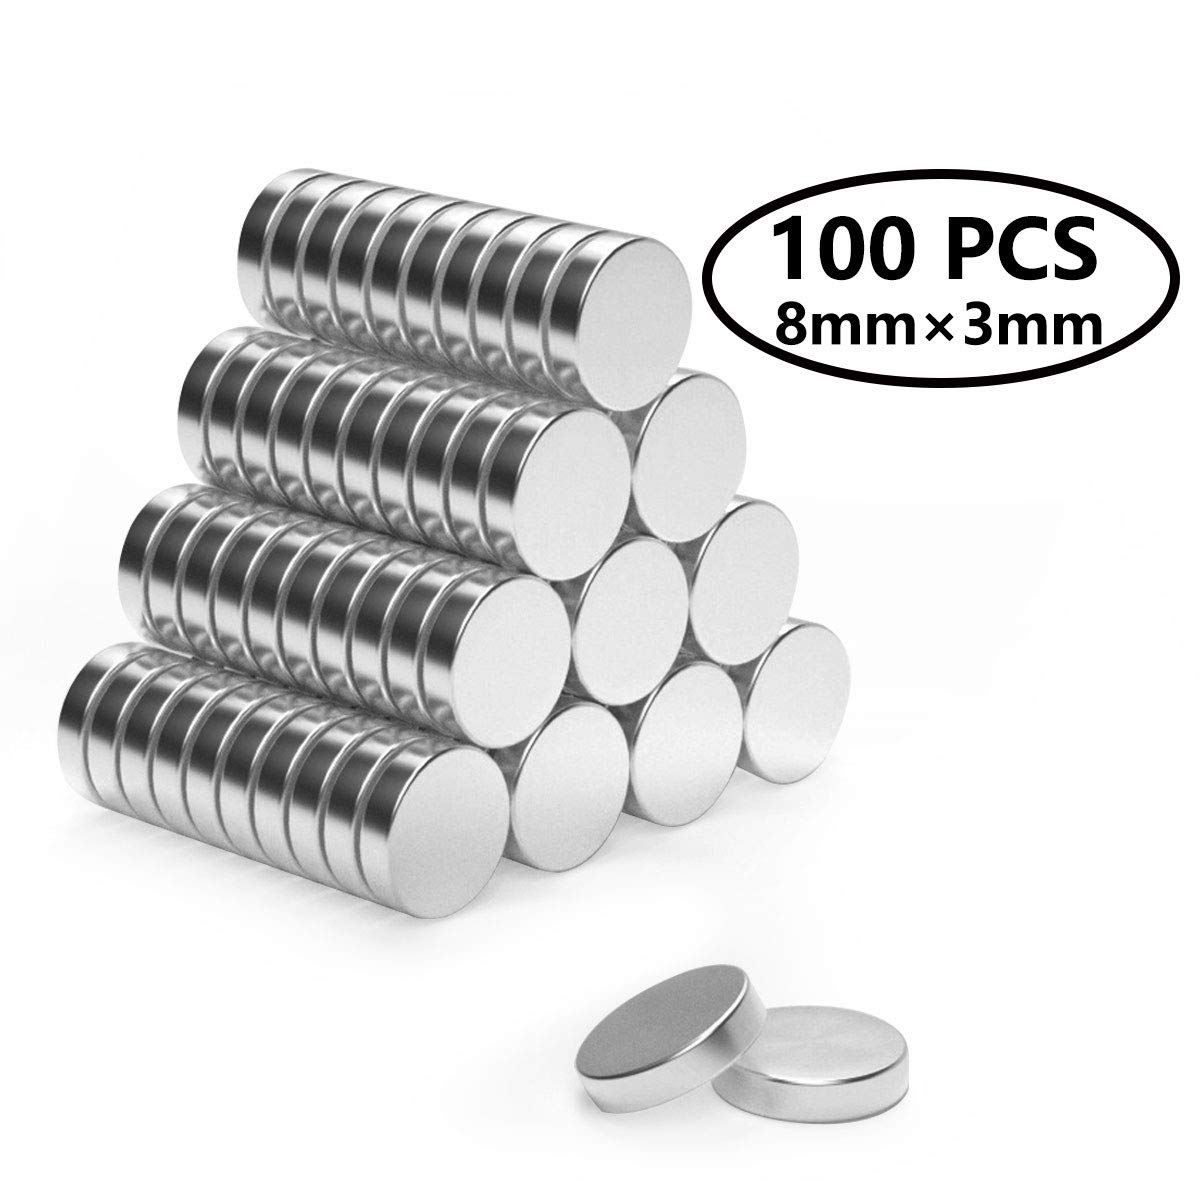 5-100Pcs N52 Neodymium Disc Strong Magnets Round 8mmX3mm Rare Earth NdFeB Magnet 